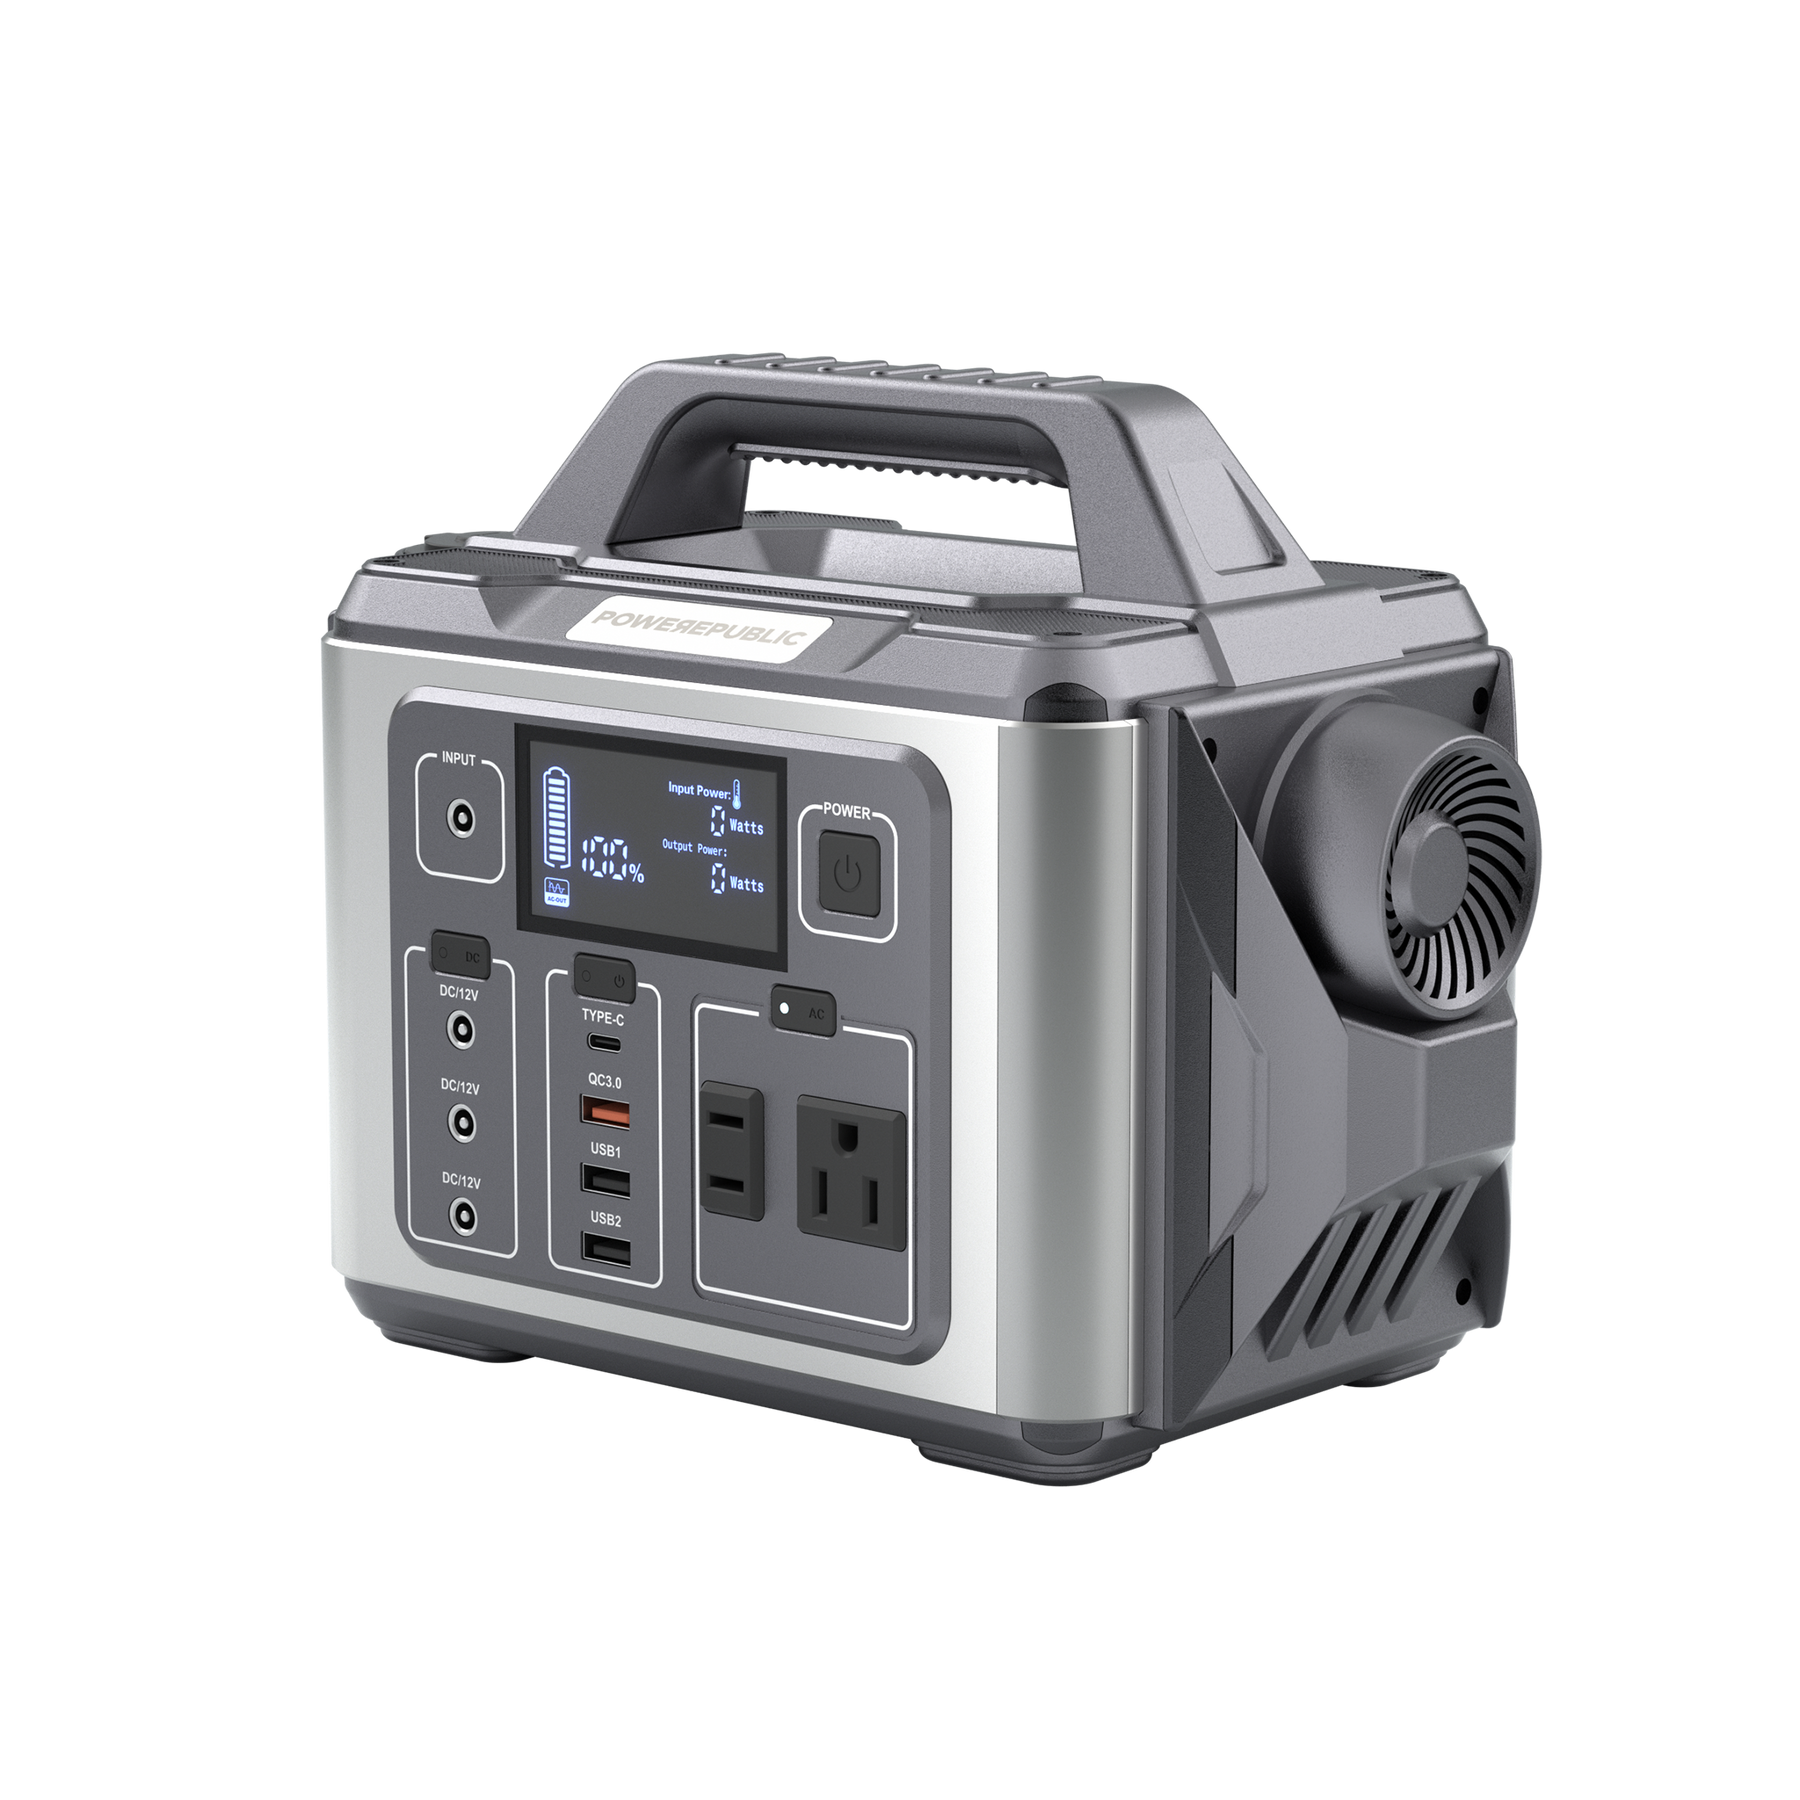 POWEREPUBLIC T306 portable power station, 300W 296Wh, metallic gray body with turbine-engine design, a handle, an LCD screen, and input and output ports.